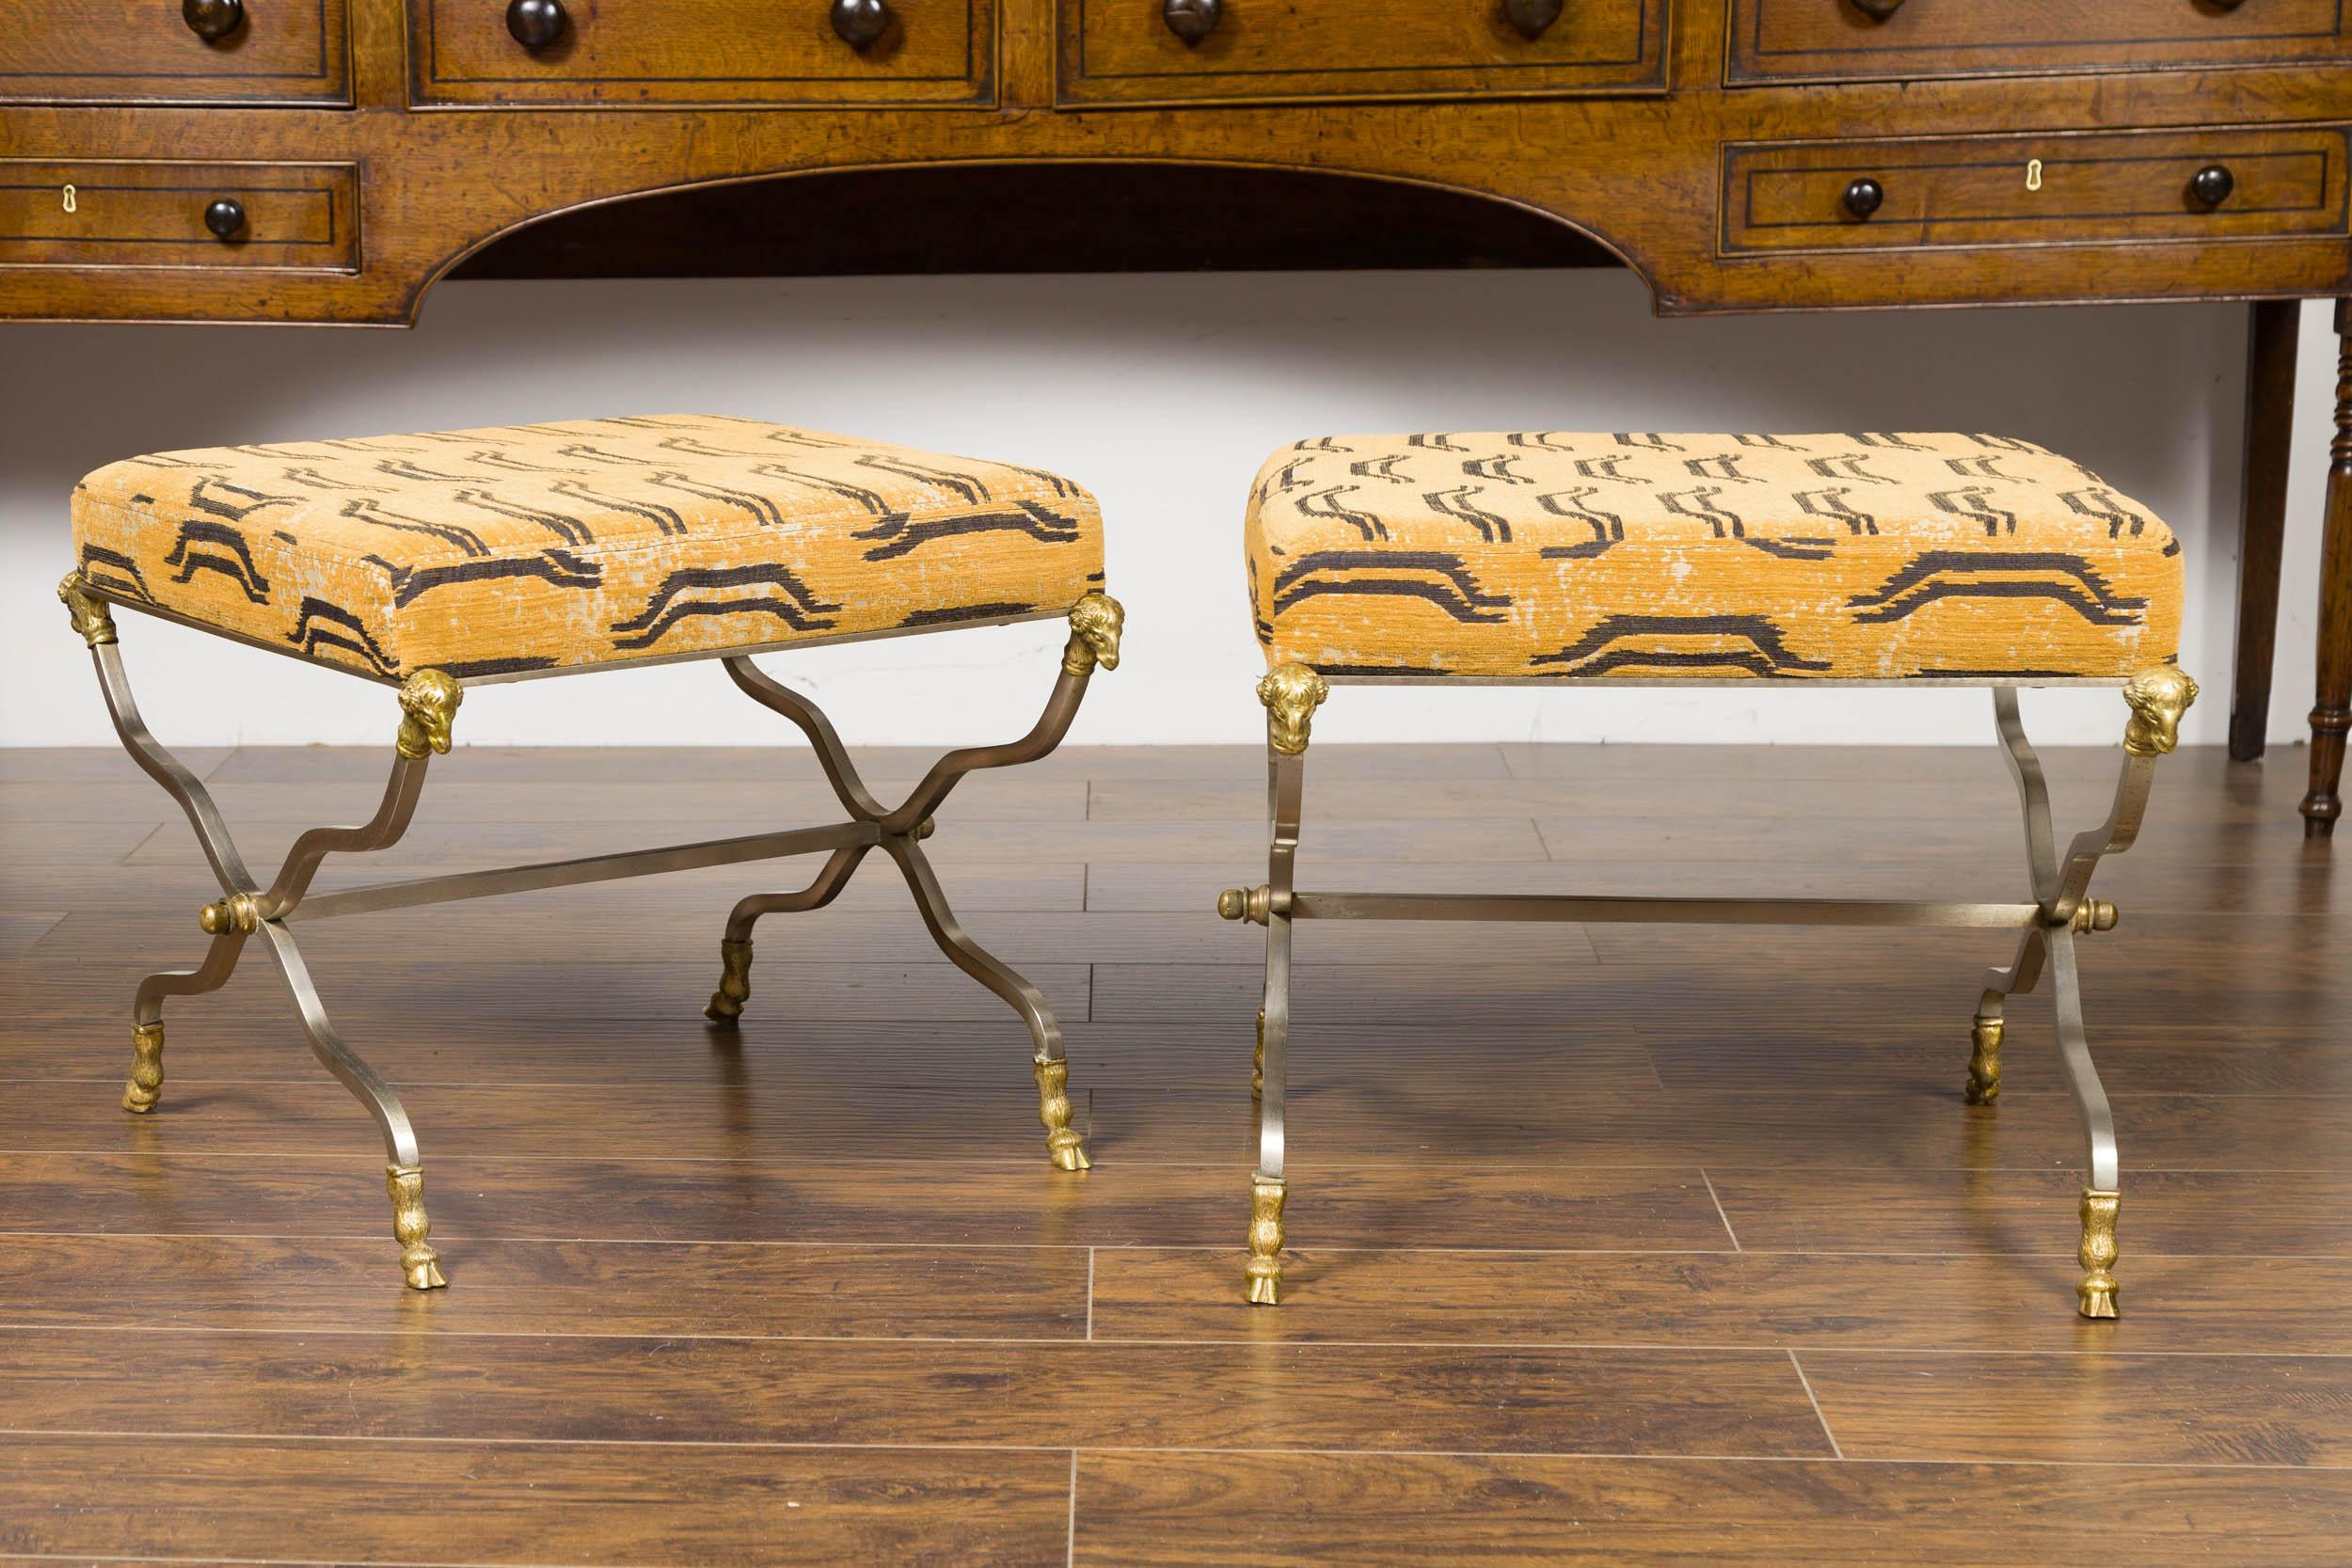 A pair of Italian Maison Jansen style steel and bronze stools from the mid-20th century, with rams' heads and upholstered seats. Born in Italy during the midcentury period, each of this pair of stools features a square upholstered seat, resting on a